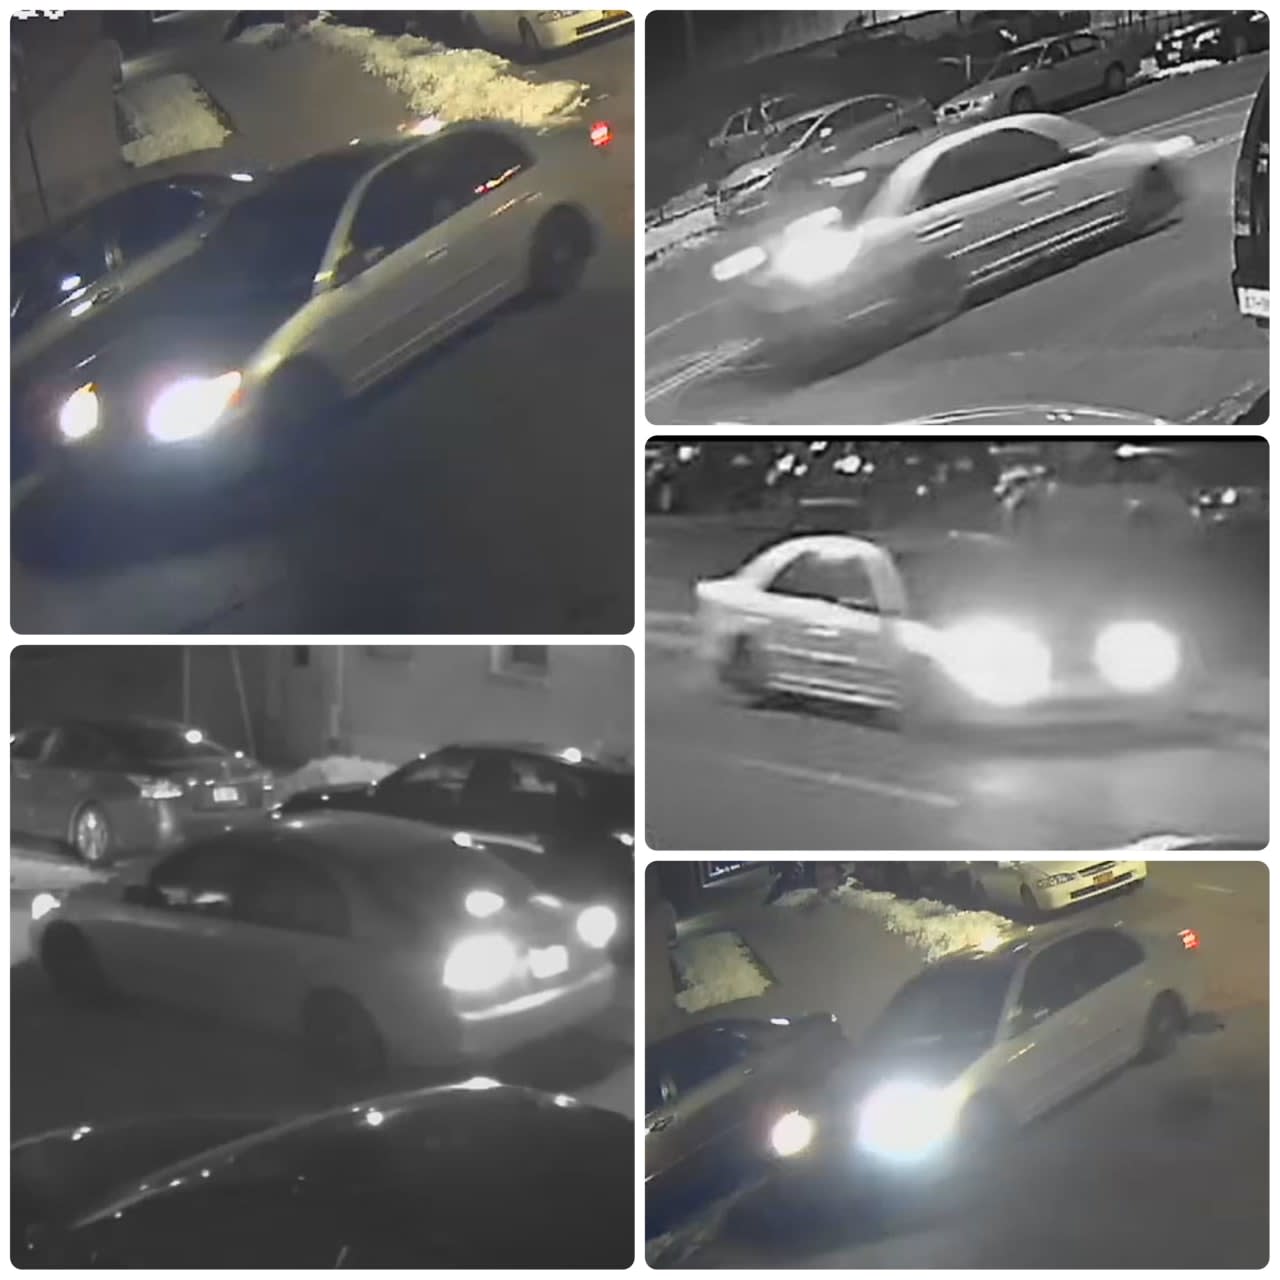 Police in Yonkers are attempting to track down the driver of this gray sedan.